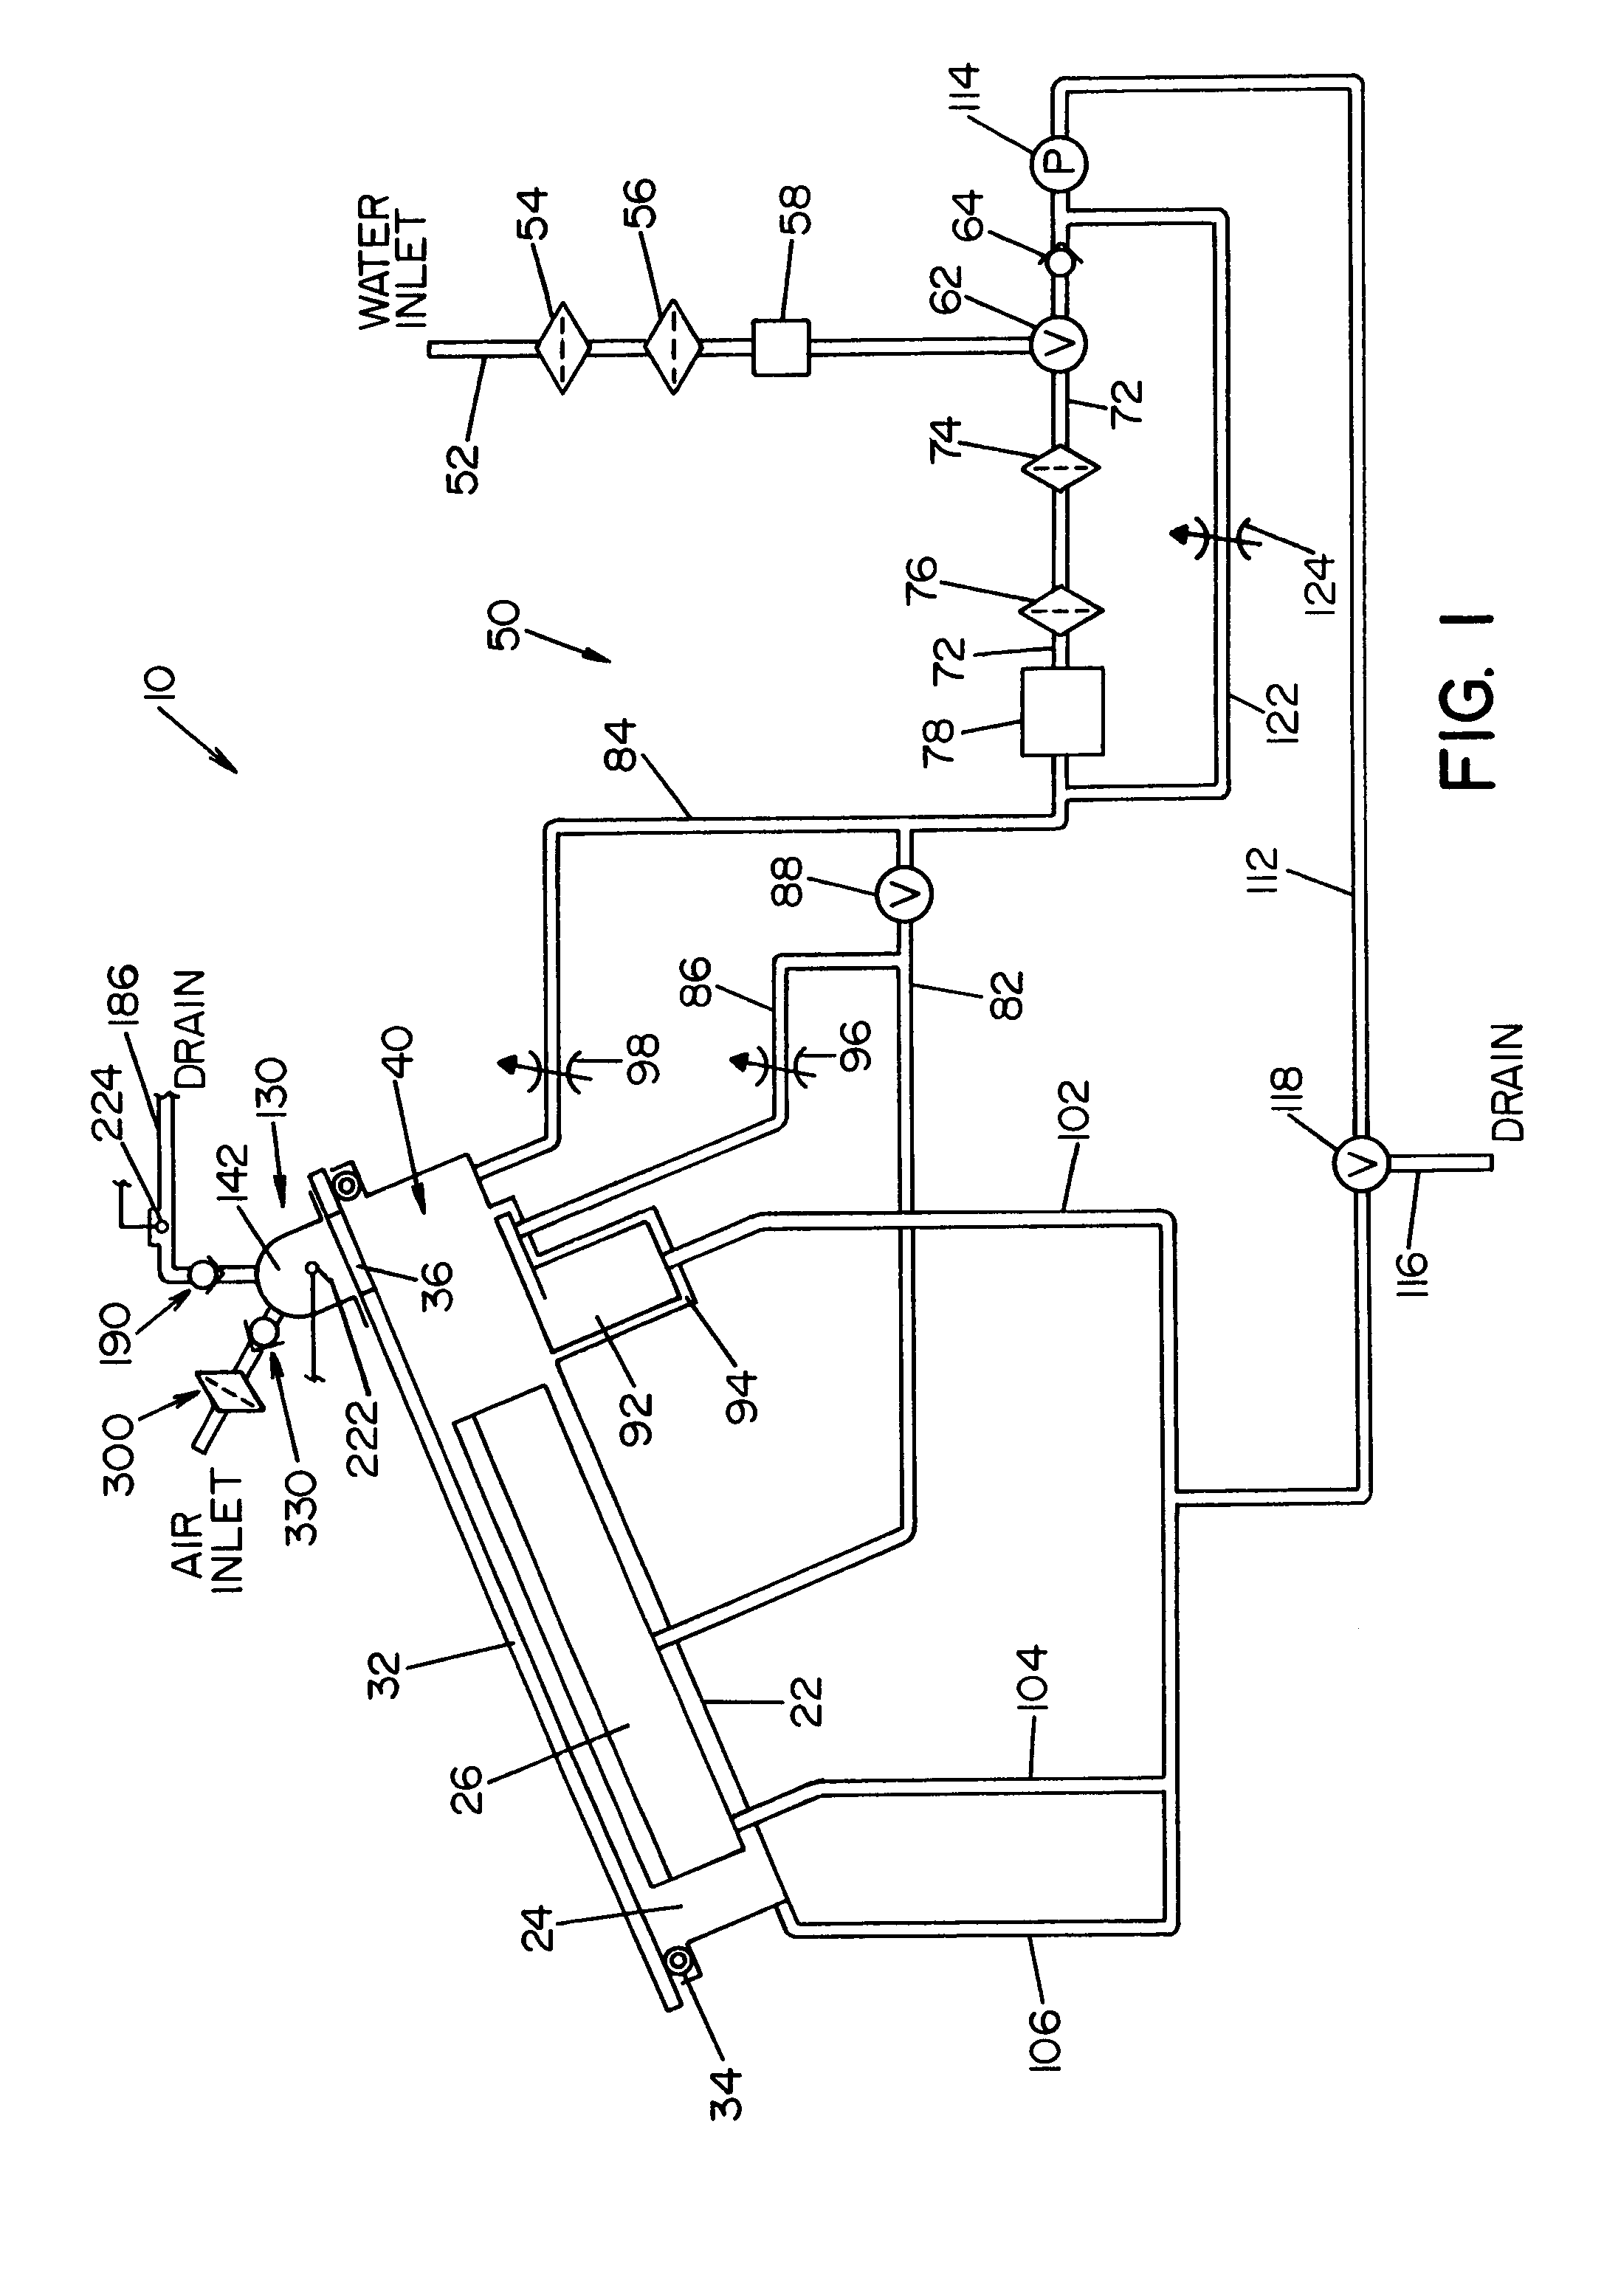 Fluid over-flow/make-up air assembly for reprocessor